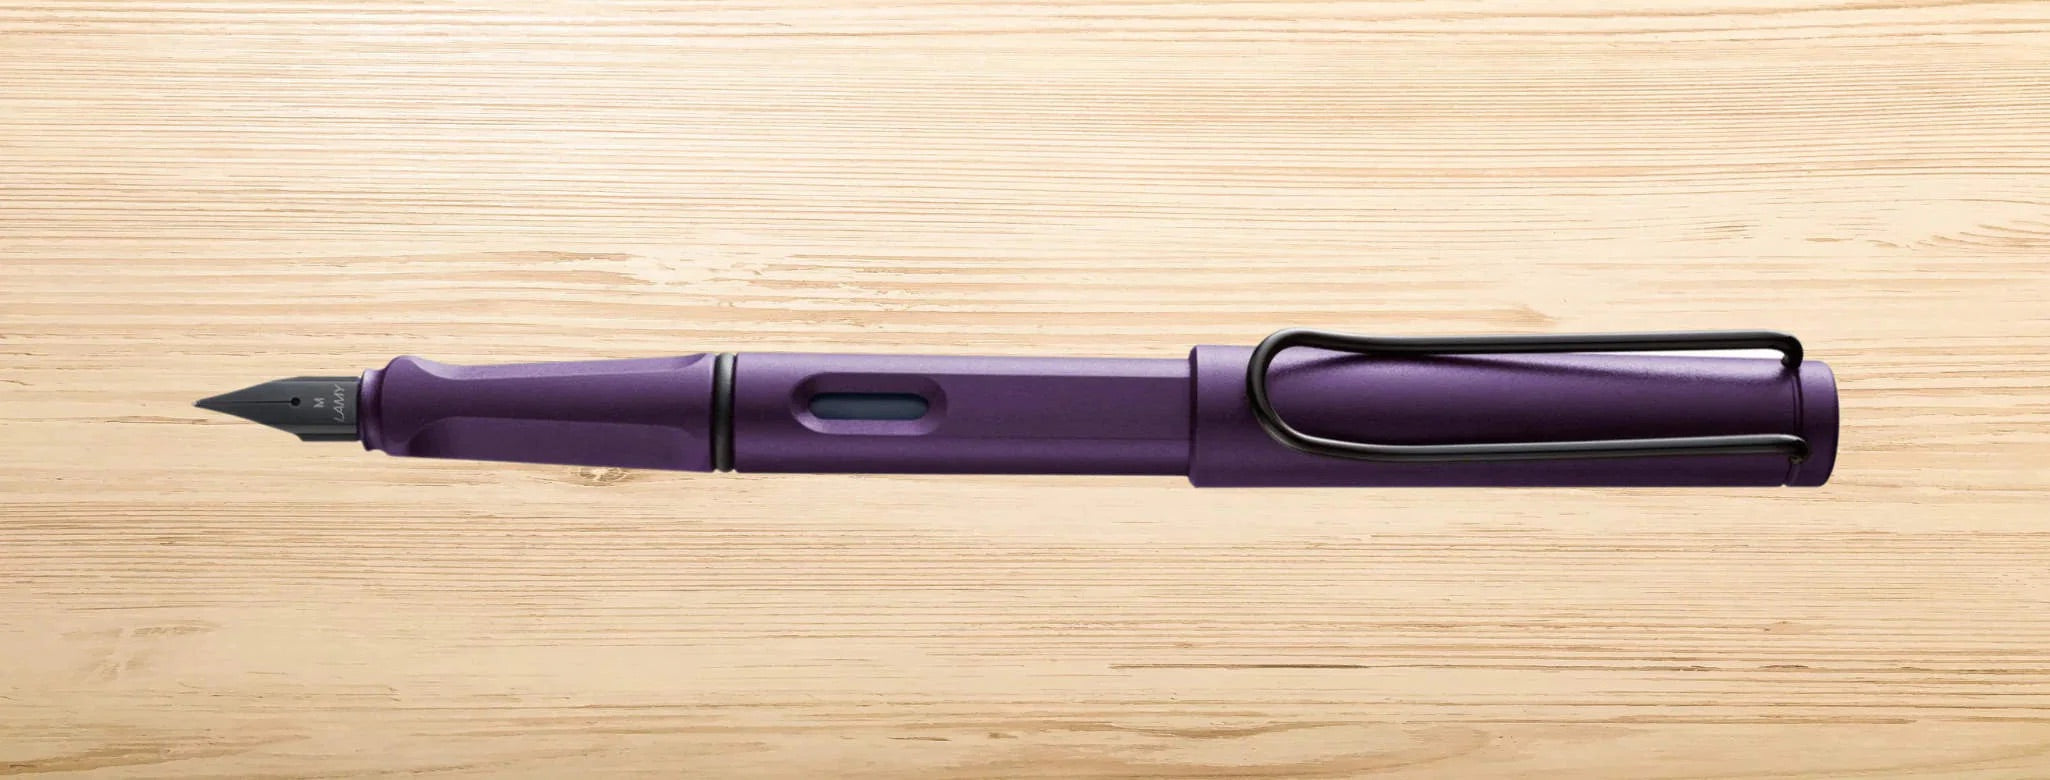 Looking Back at 10 Years of LAMY Special Edition Fountain Pens - 2016 - Dark Lilac